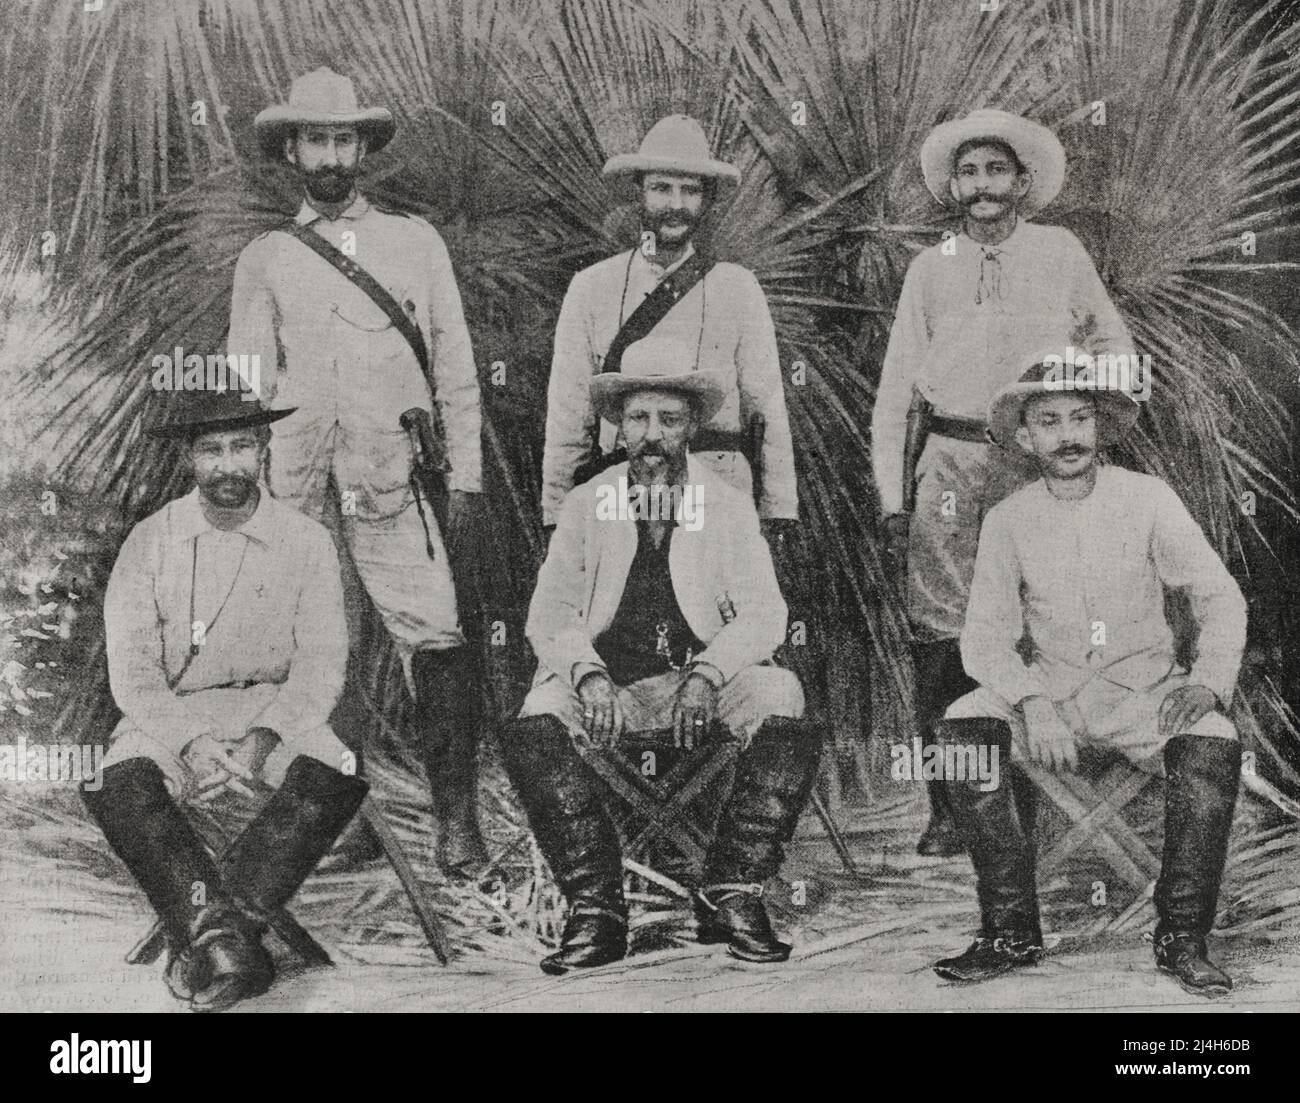 Cuban War of Independence (1895-1898). Island of Cuba. Government of the proclaimed 'Republic of Cuba in Arms' between 1897 and 1898. From left to right (seated): Domingo Méndez Capote (1863-1934), Vice-President; Bartolomé Masó (1830-1907) President; Manuel Ramón Silva, Secretary of the Interior, representative to the Constituent Assembly of La Yaya. Standing: Ernesto Fons Sterling, Secretary of the Treasure; Andrés Moreno de la Torre, Secretary of Foreign Affairs; José Braulio Alemán, Secretary of War. Photoengranving. La Ilustración Española y Americana, 1898. Stock Photo